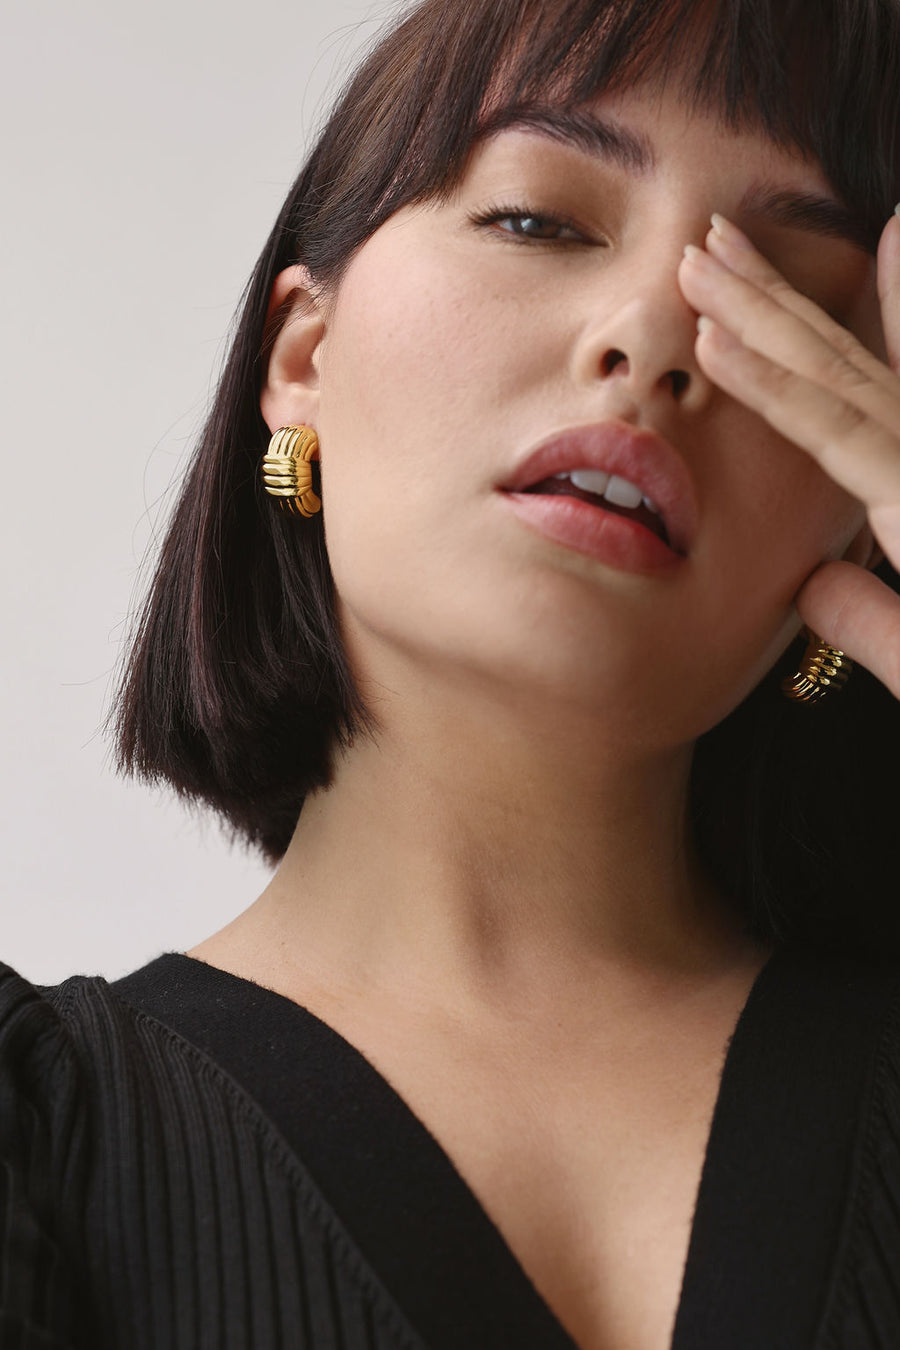 woman with bob length brown hair, weaing chunky gold earrings, staring down the camera, covering her left eye with her fingers